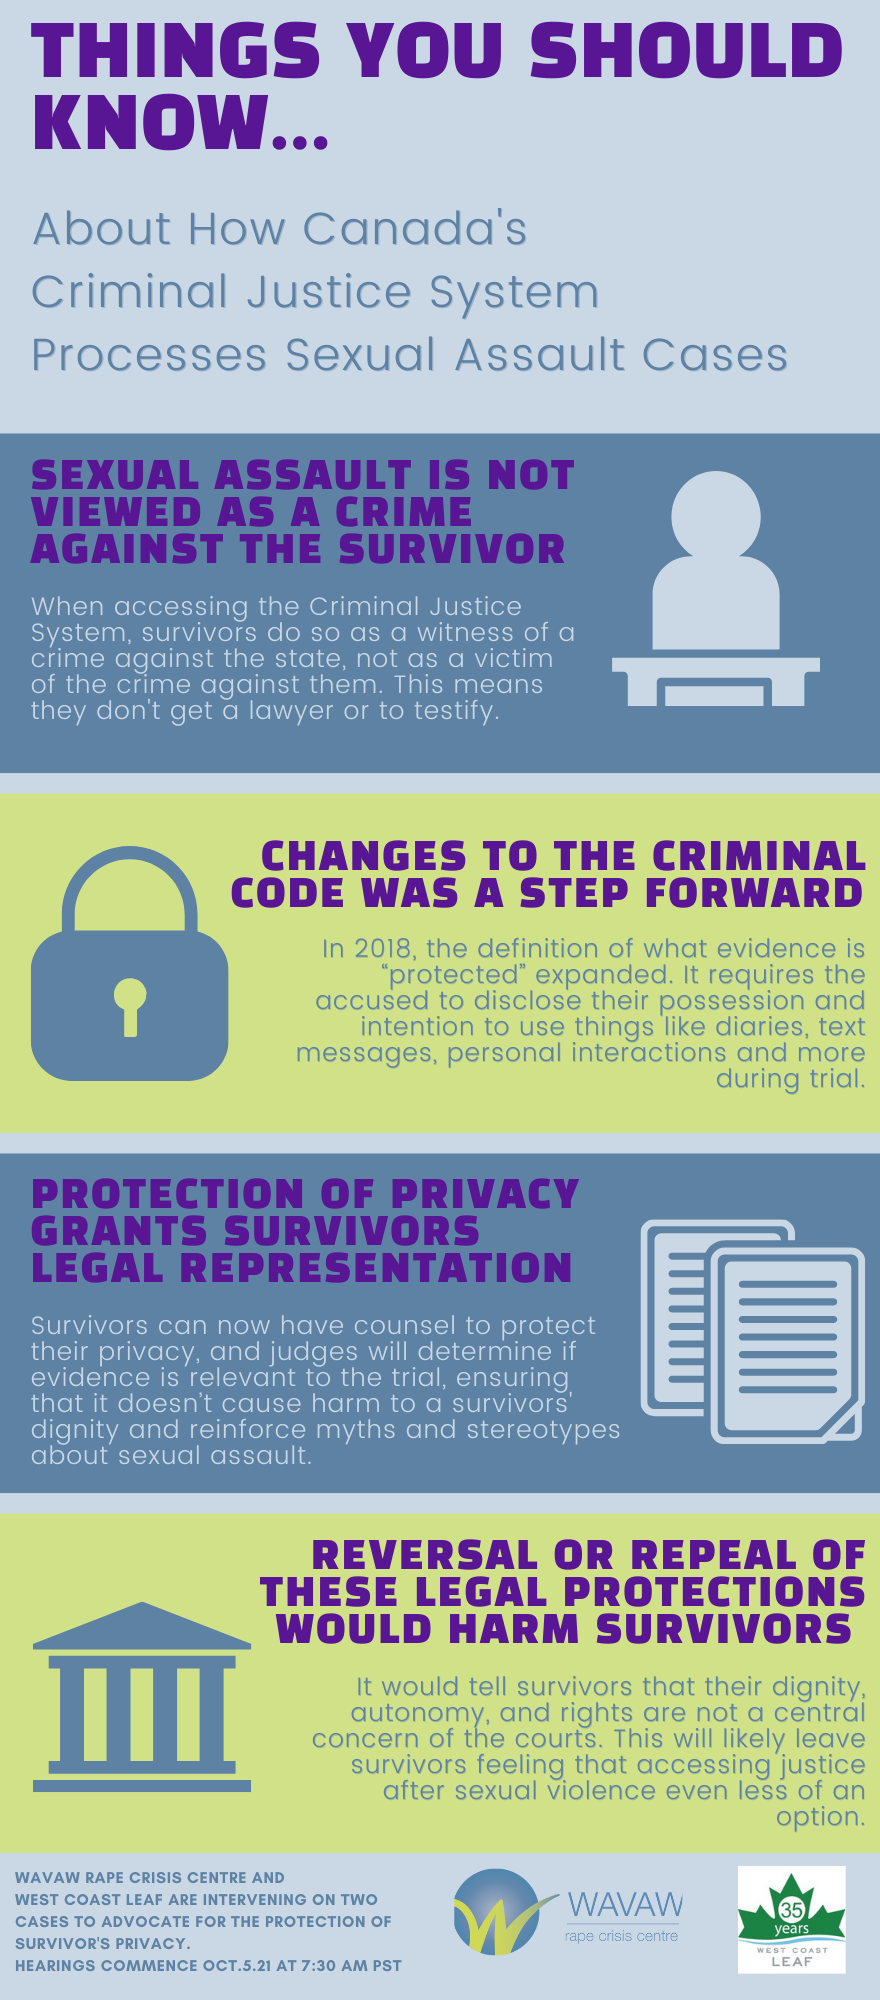 Blue and green infographic: Things You Should Know… About How Canada’s Criminal Justice System Processes Sexual Assault Cases.

Sexual assault is not viewed as a crime against the survivor: When accessing the Criminal Justice System, survivors do so as a witness of a crime against the state, not as a victim of a crime against them. This means they don’t get a lawyer or to testify. [Icon of a person testifying.]

Changes to the criminal code were a step forward: In 2018 the definition of what evidence is “protected” expanded. It requires the accused to disclose their possession and intention to use things like diaries, text messages, personal interactions and more during trial. [Icon of a lock.]

Protection of privacy grants survivors legal representation: Survivors can now have counsel to protect their privacy, and judges will determine if evidence is relevant to the trial, ensuring that it doesn’t cause a harm to a survivor’s dignity and reinforce myths and stereotypes about sexual assault. [Icon of documents]

Reversal or repeal of these legal protections would harm survivors: It would tell survivors that their dignity, autonomy, and rights are not a central concern of the courts. This will likely leave survivors feeling that accessing justice after sexual violence is even less of an option. [Icon of a courthouse.]